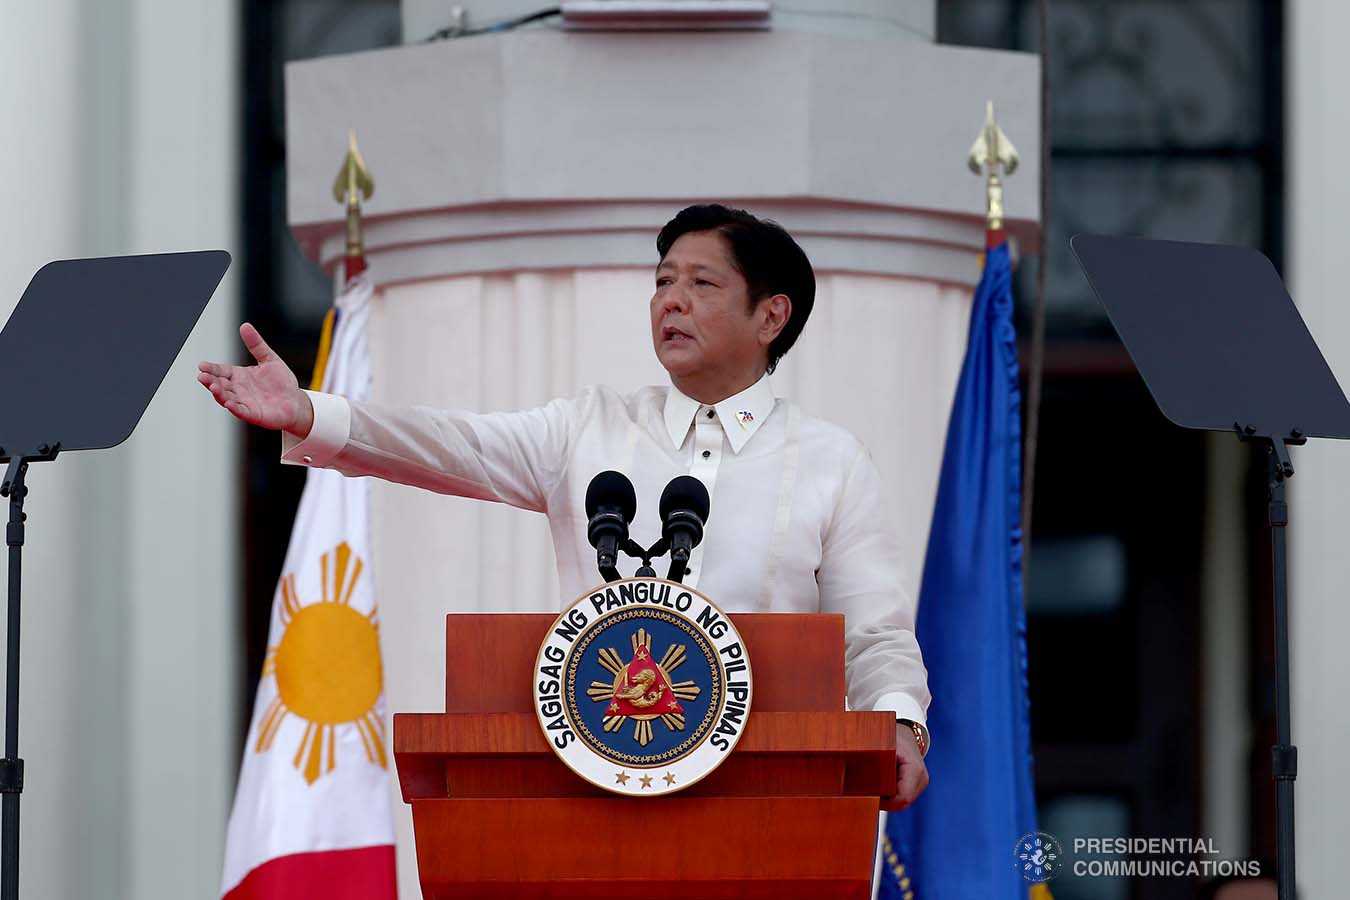 PH transition: The Marcos Jr. Presidency in 2022